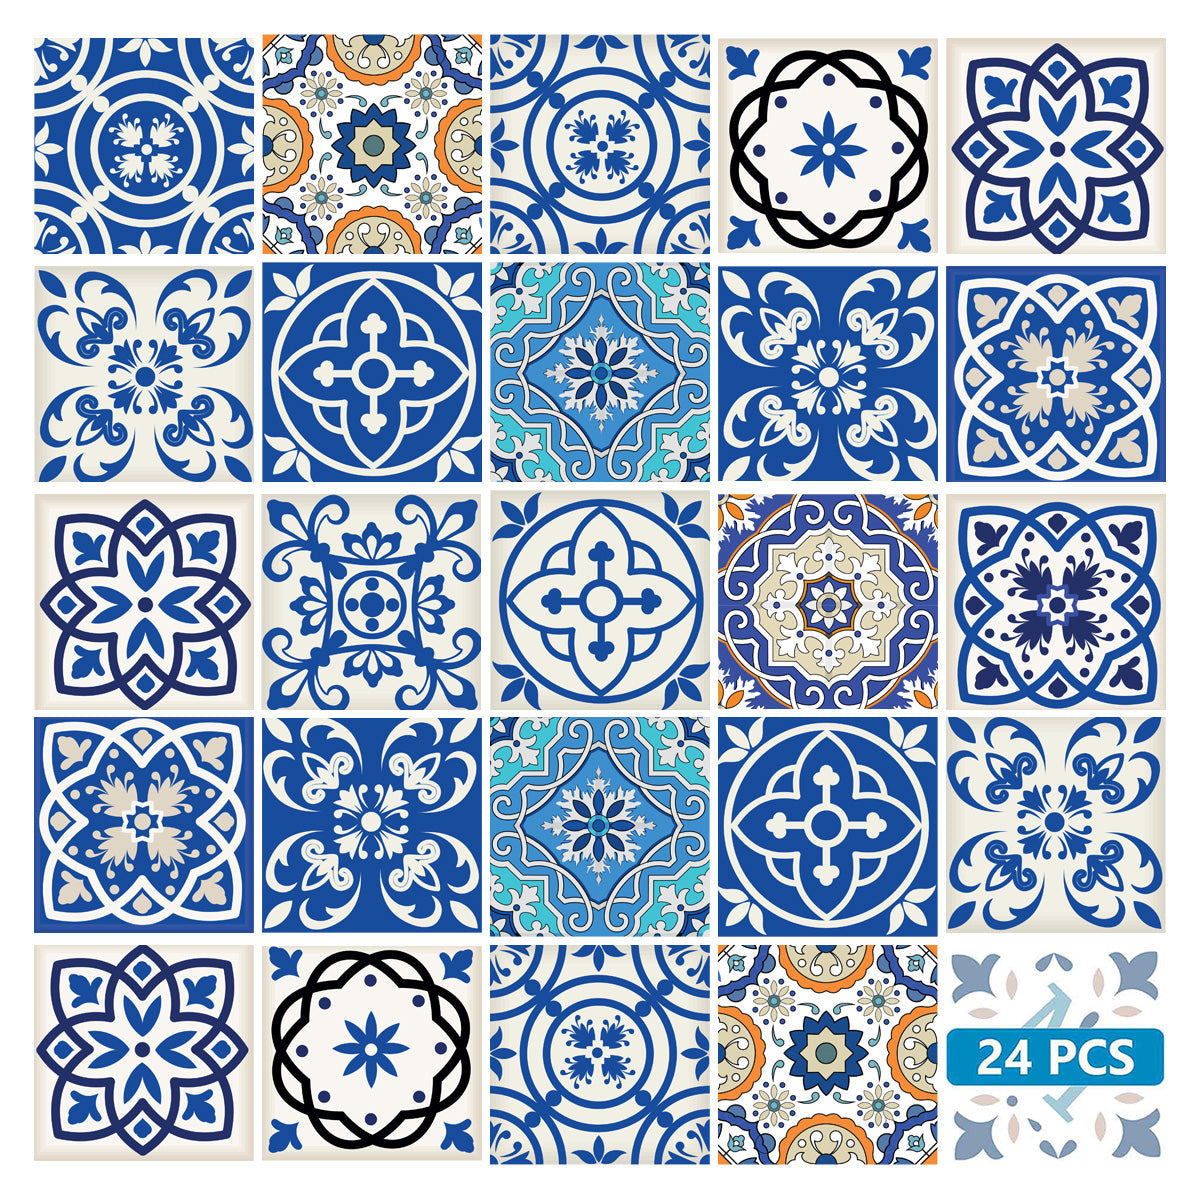 7" x 7" Blue and Aqua Pop Mosaic Peel and Stick Removable Tiles